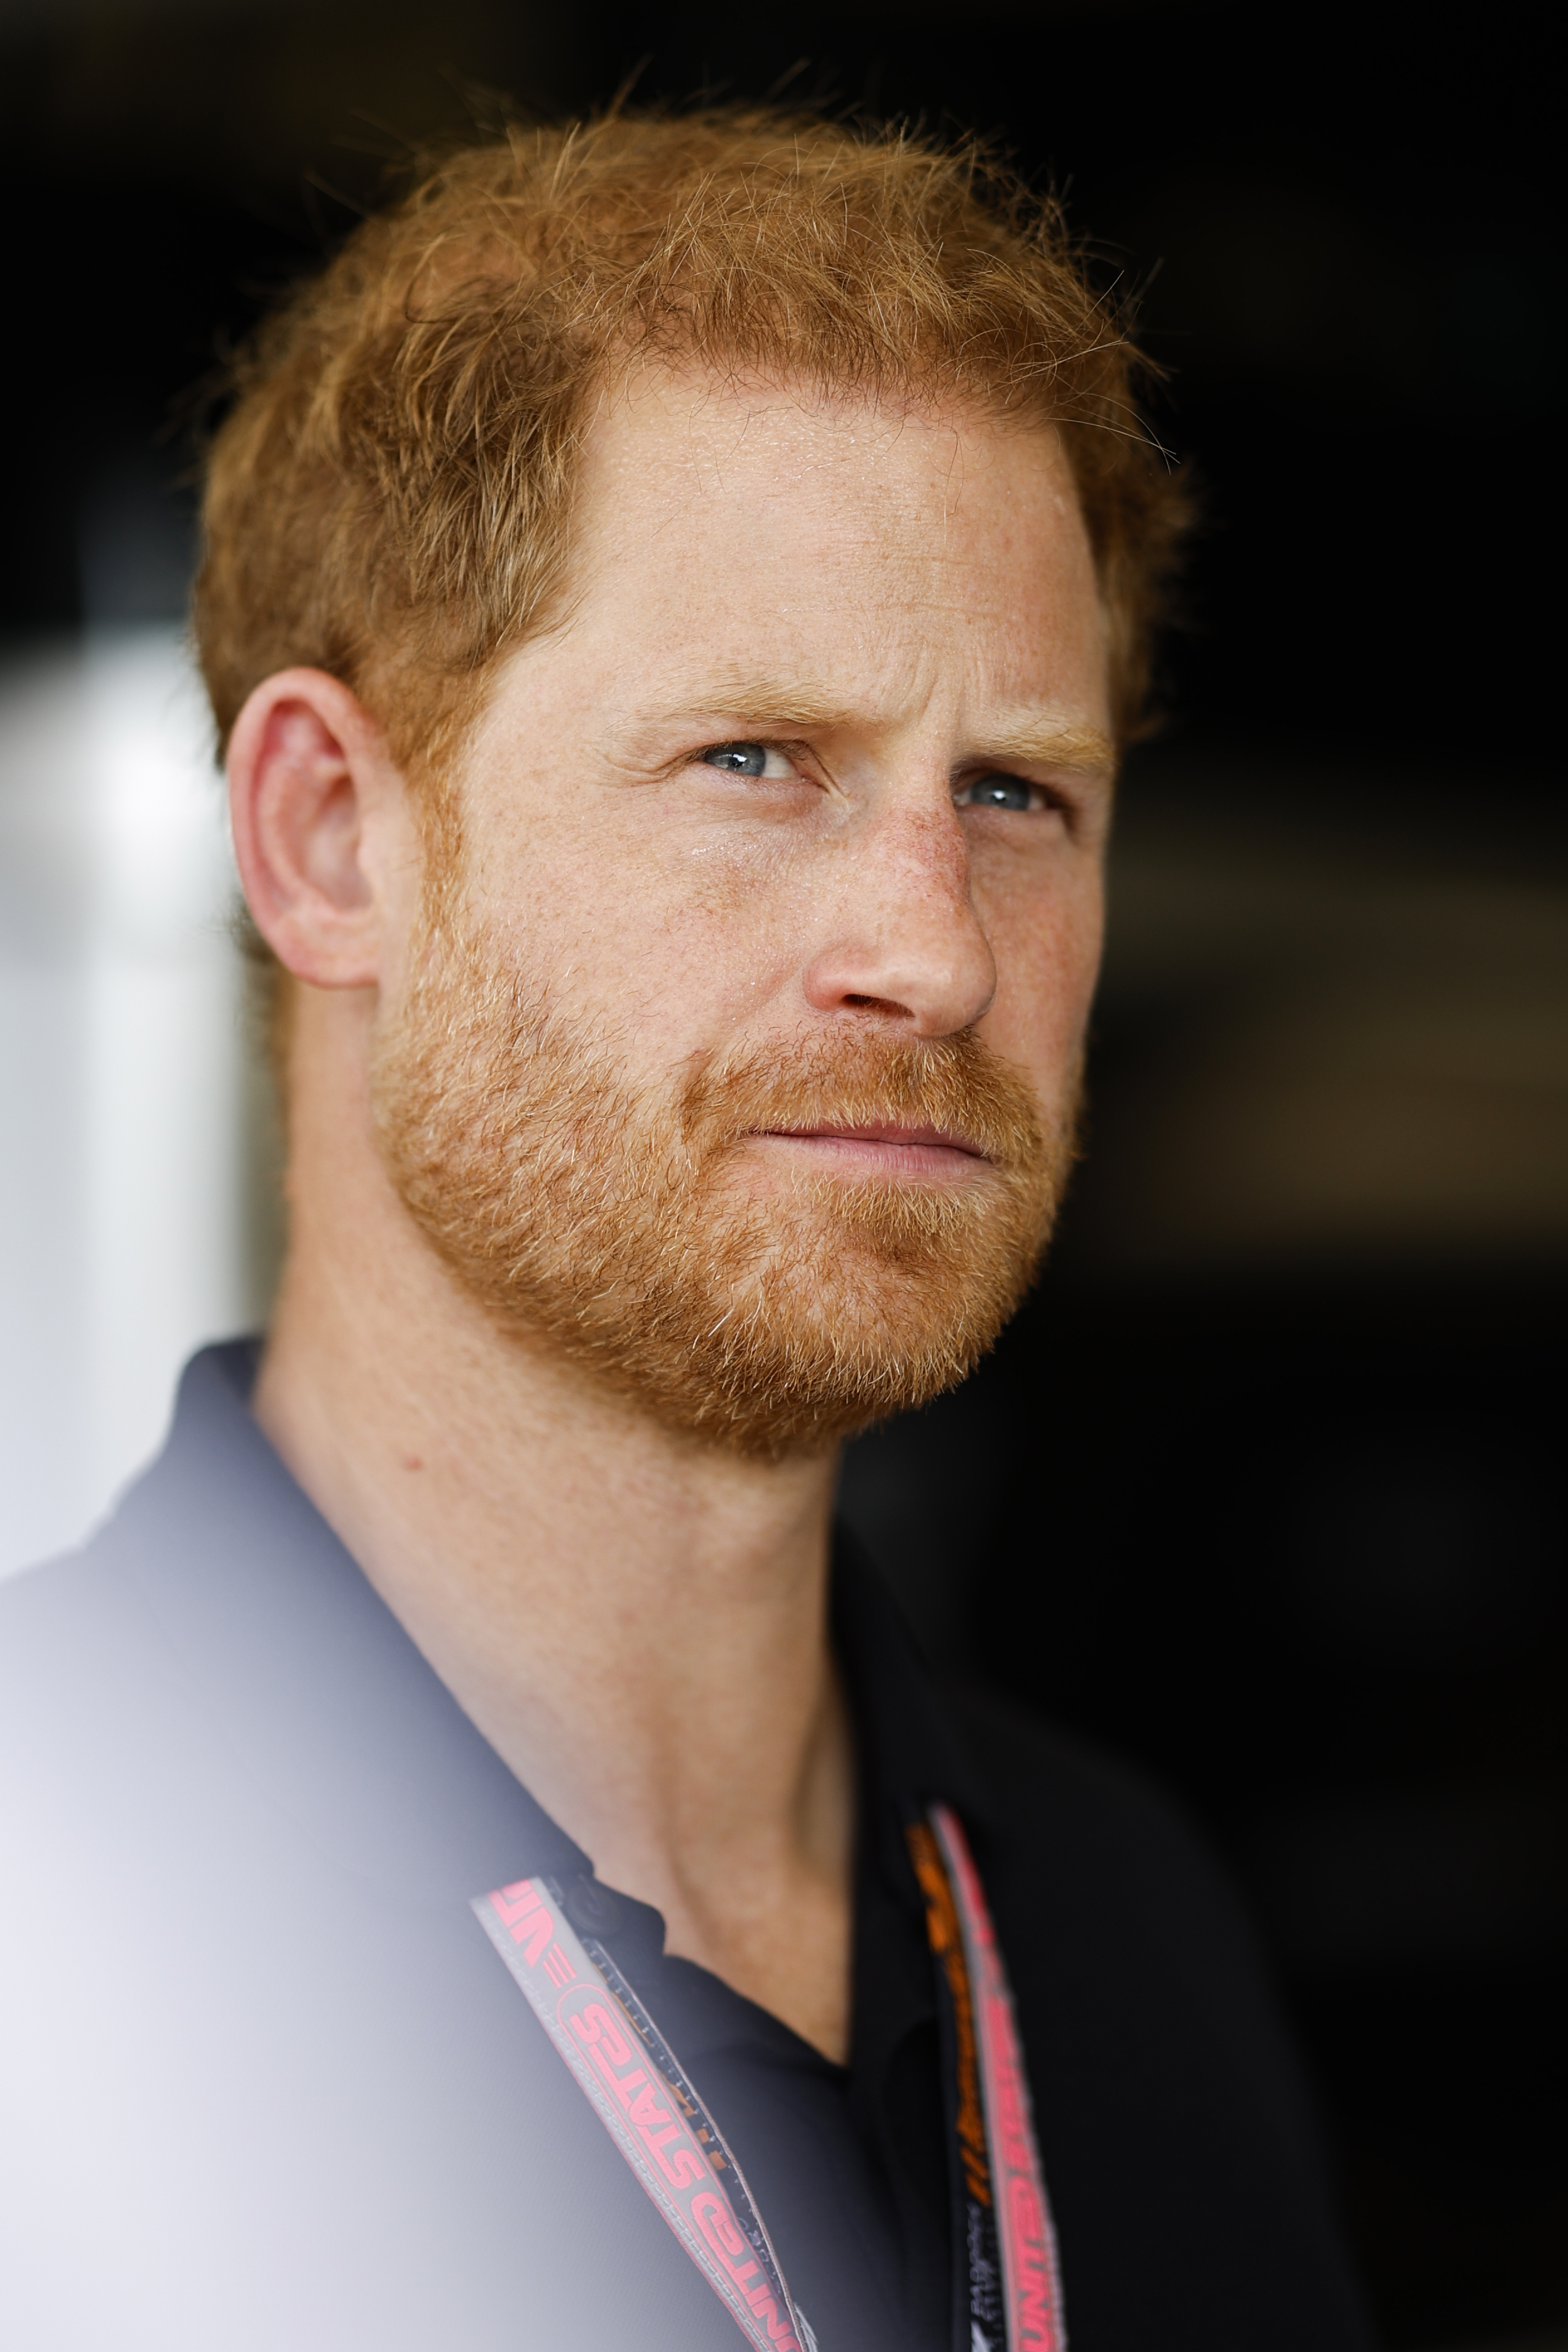 Prince Harry, Duke of Sussex, at the F1 Grand Prix of United States event in Austin, Texas on October 22, 2023 | Source: Getty Images